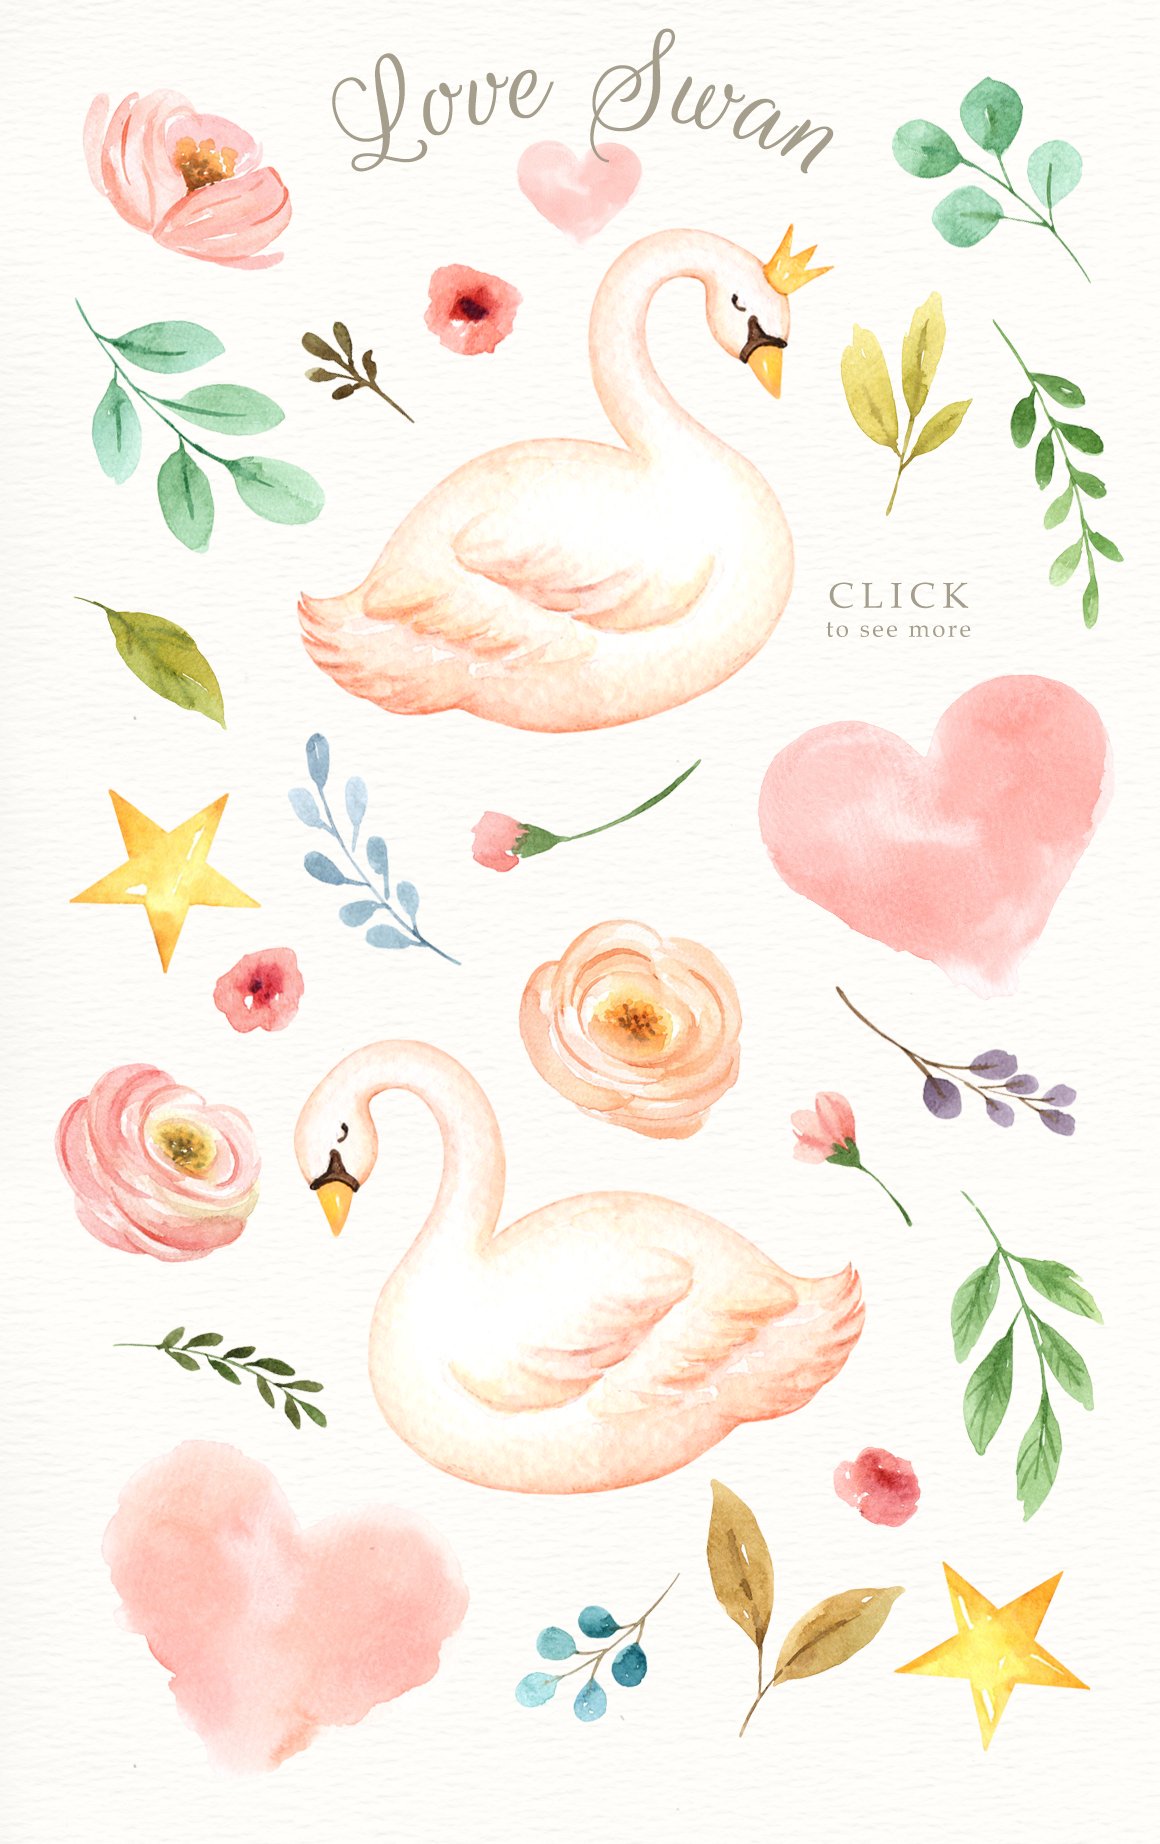 Cute pink and peach elements for swan composition.